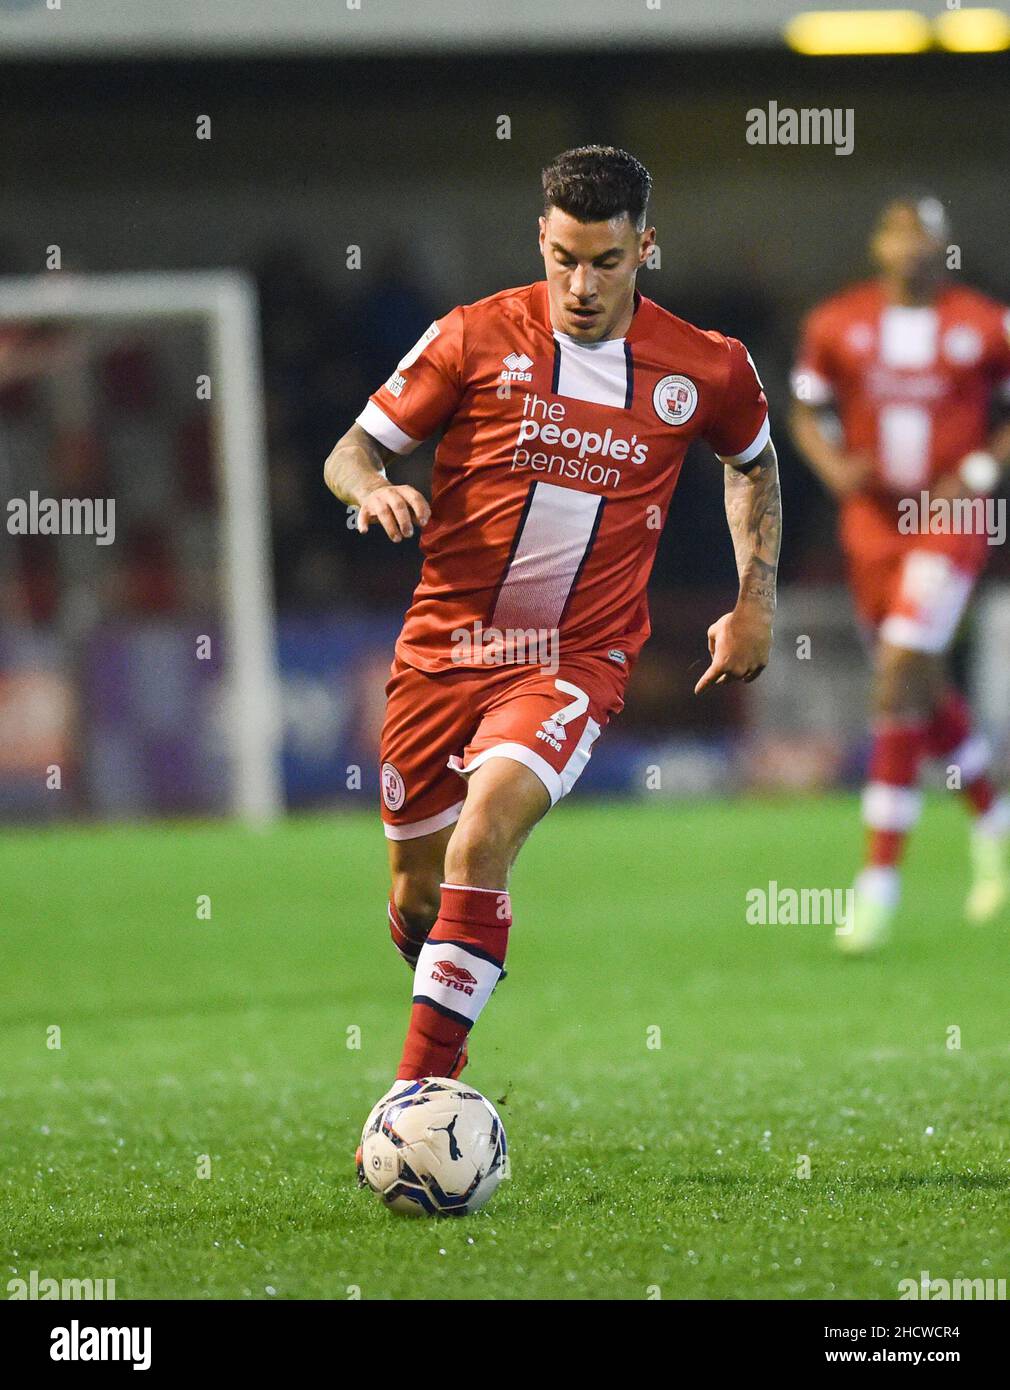 Reece Grego-Cox of Crawley during the Sky Bet League Two match between Crawley Town and Colchester United at the People's Pension Stadium  , Crawley ,  UK - 1st January 2022 - Editorial use only. No merchandising. For Football images FA and Premier League restrictions apply inc. no internet/mobile usage without FAPL license - for details contact Football Dataco Stock Photo